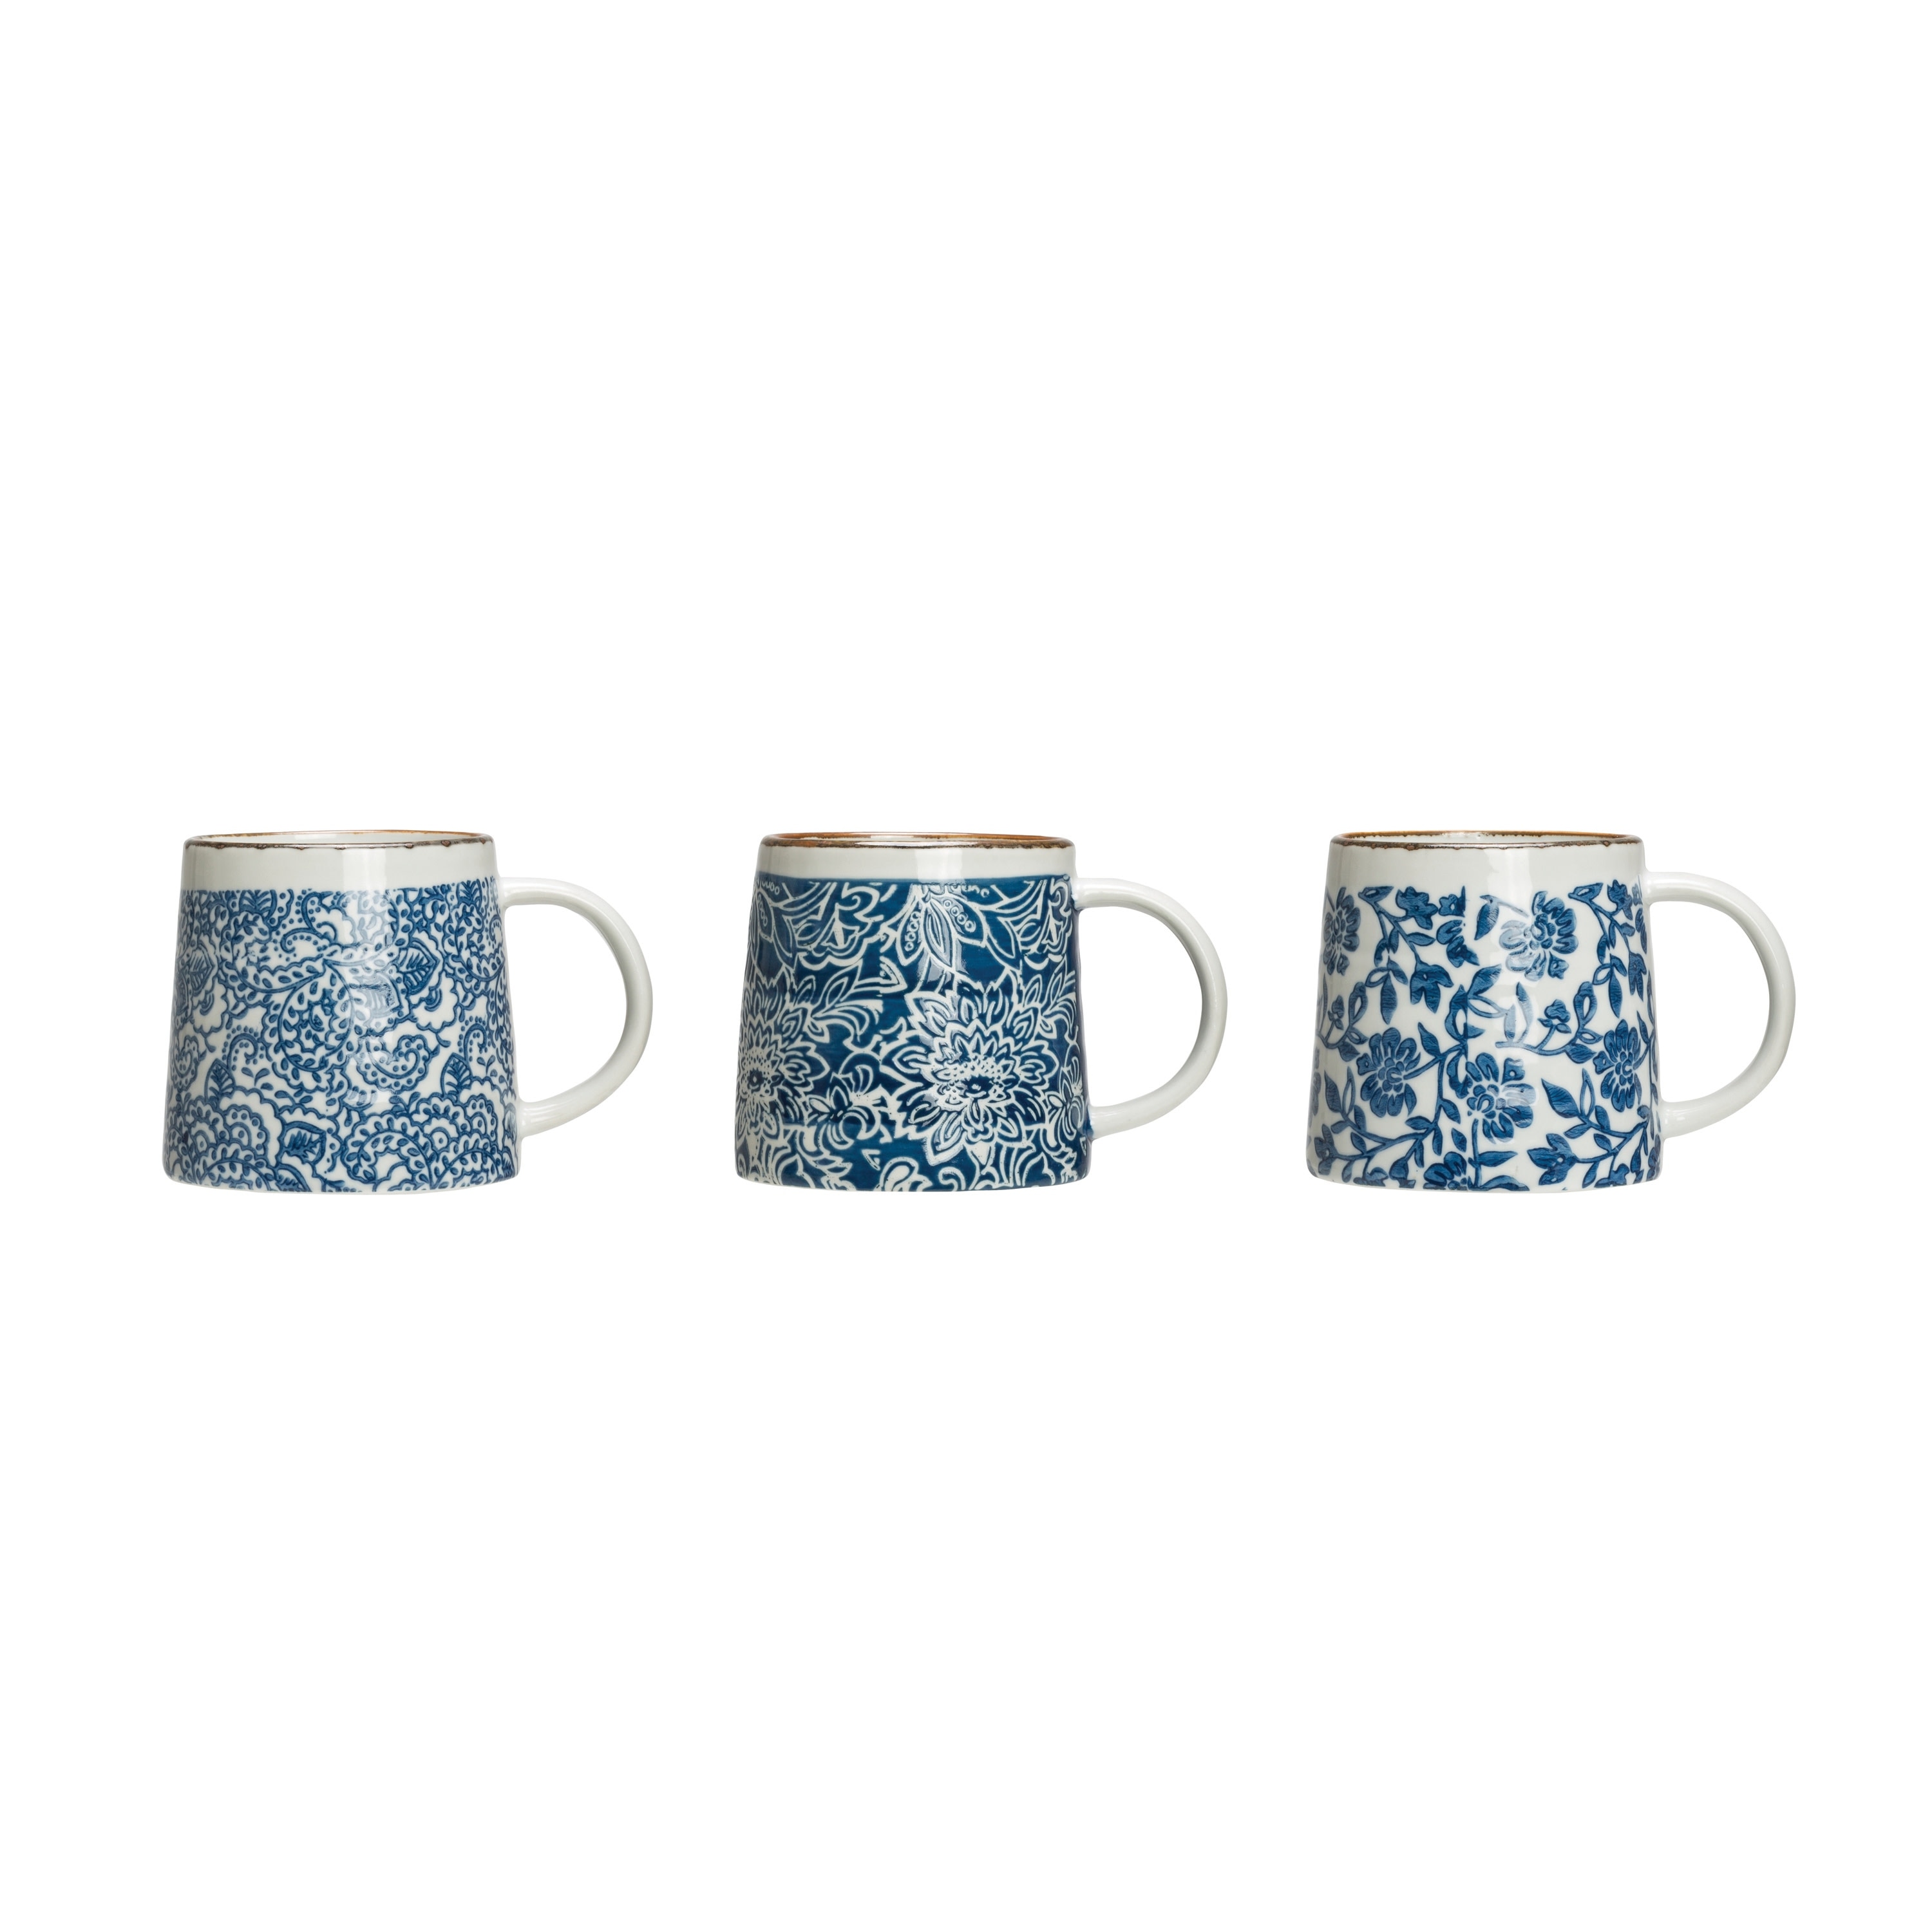 https://ak1.ostkcdn.com/images/products/is/images/direct/e1ec785a98013d45e5b692c4a5ae9e989bc6eafb/Blue-%26-White-Hand-Stamped-Stoneware-Mug-with-Gold-Rim-%28Set-of-3-Patterns%29.jpg